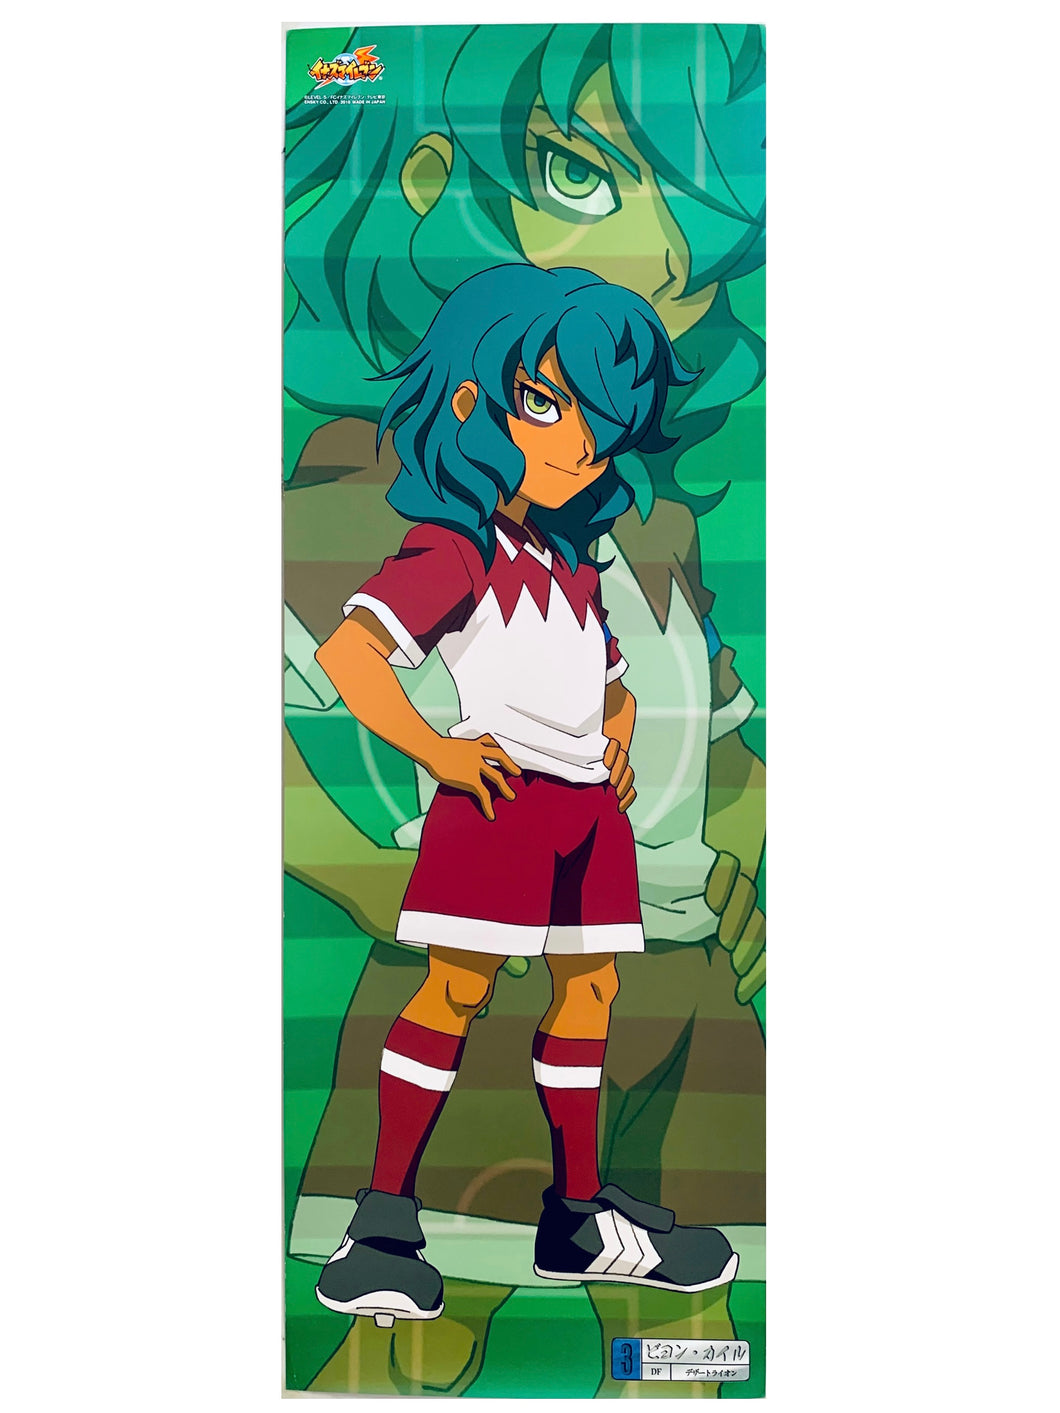 Inazuma Eleven - Bjorn Kyle - Chara Pos Collection 3 - Stick Poster